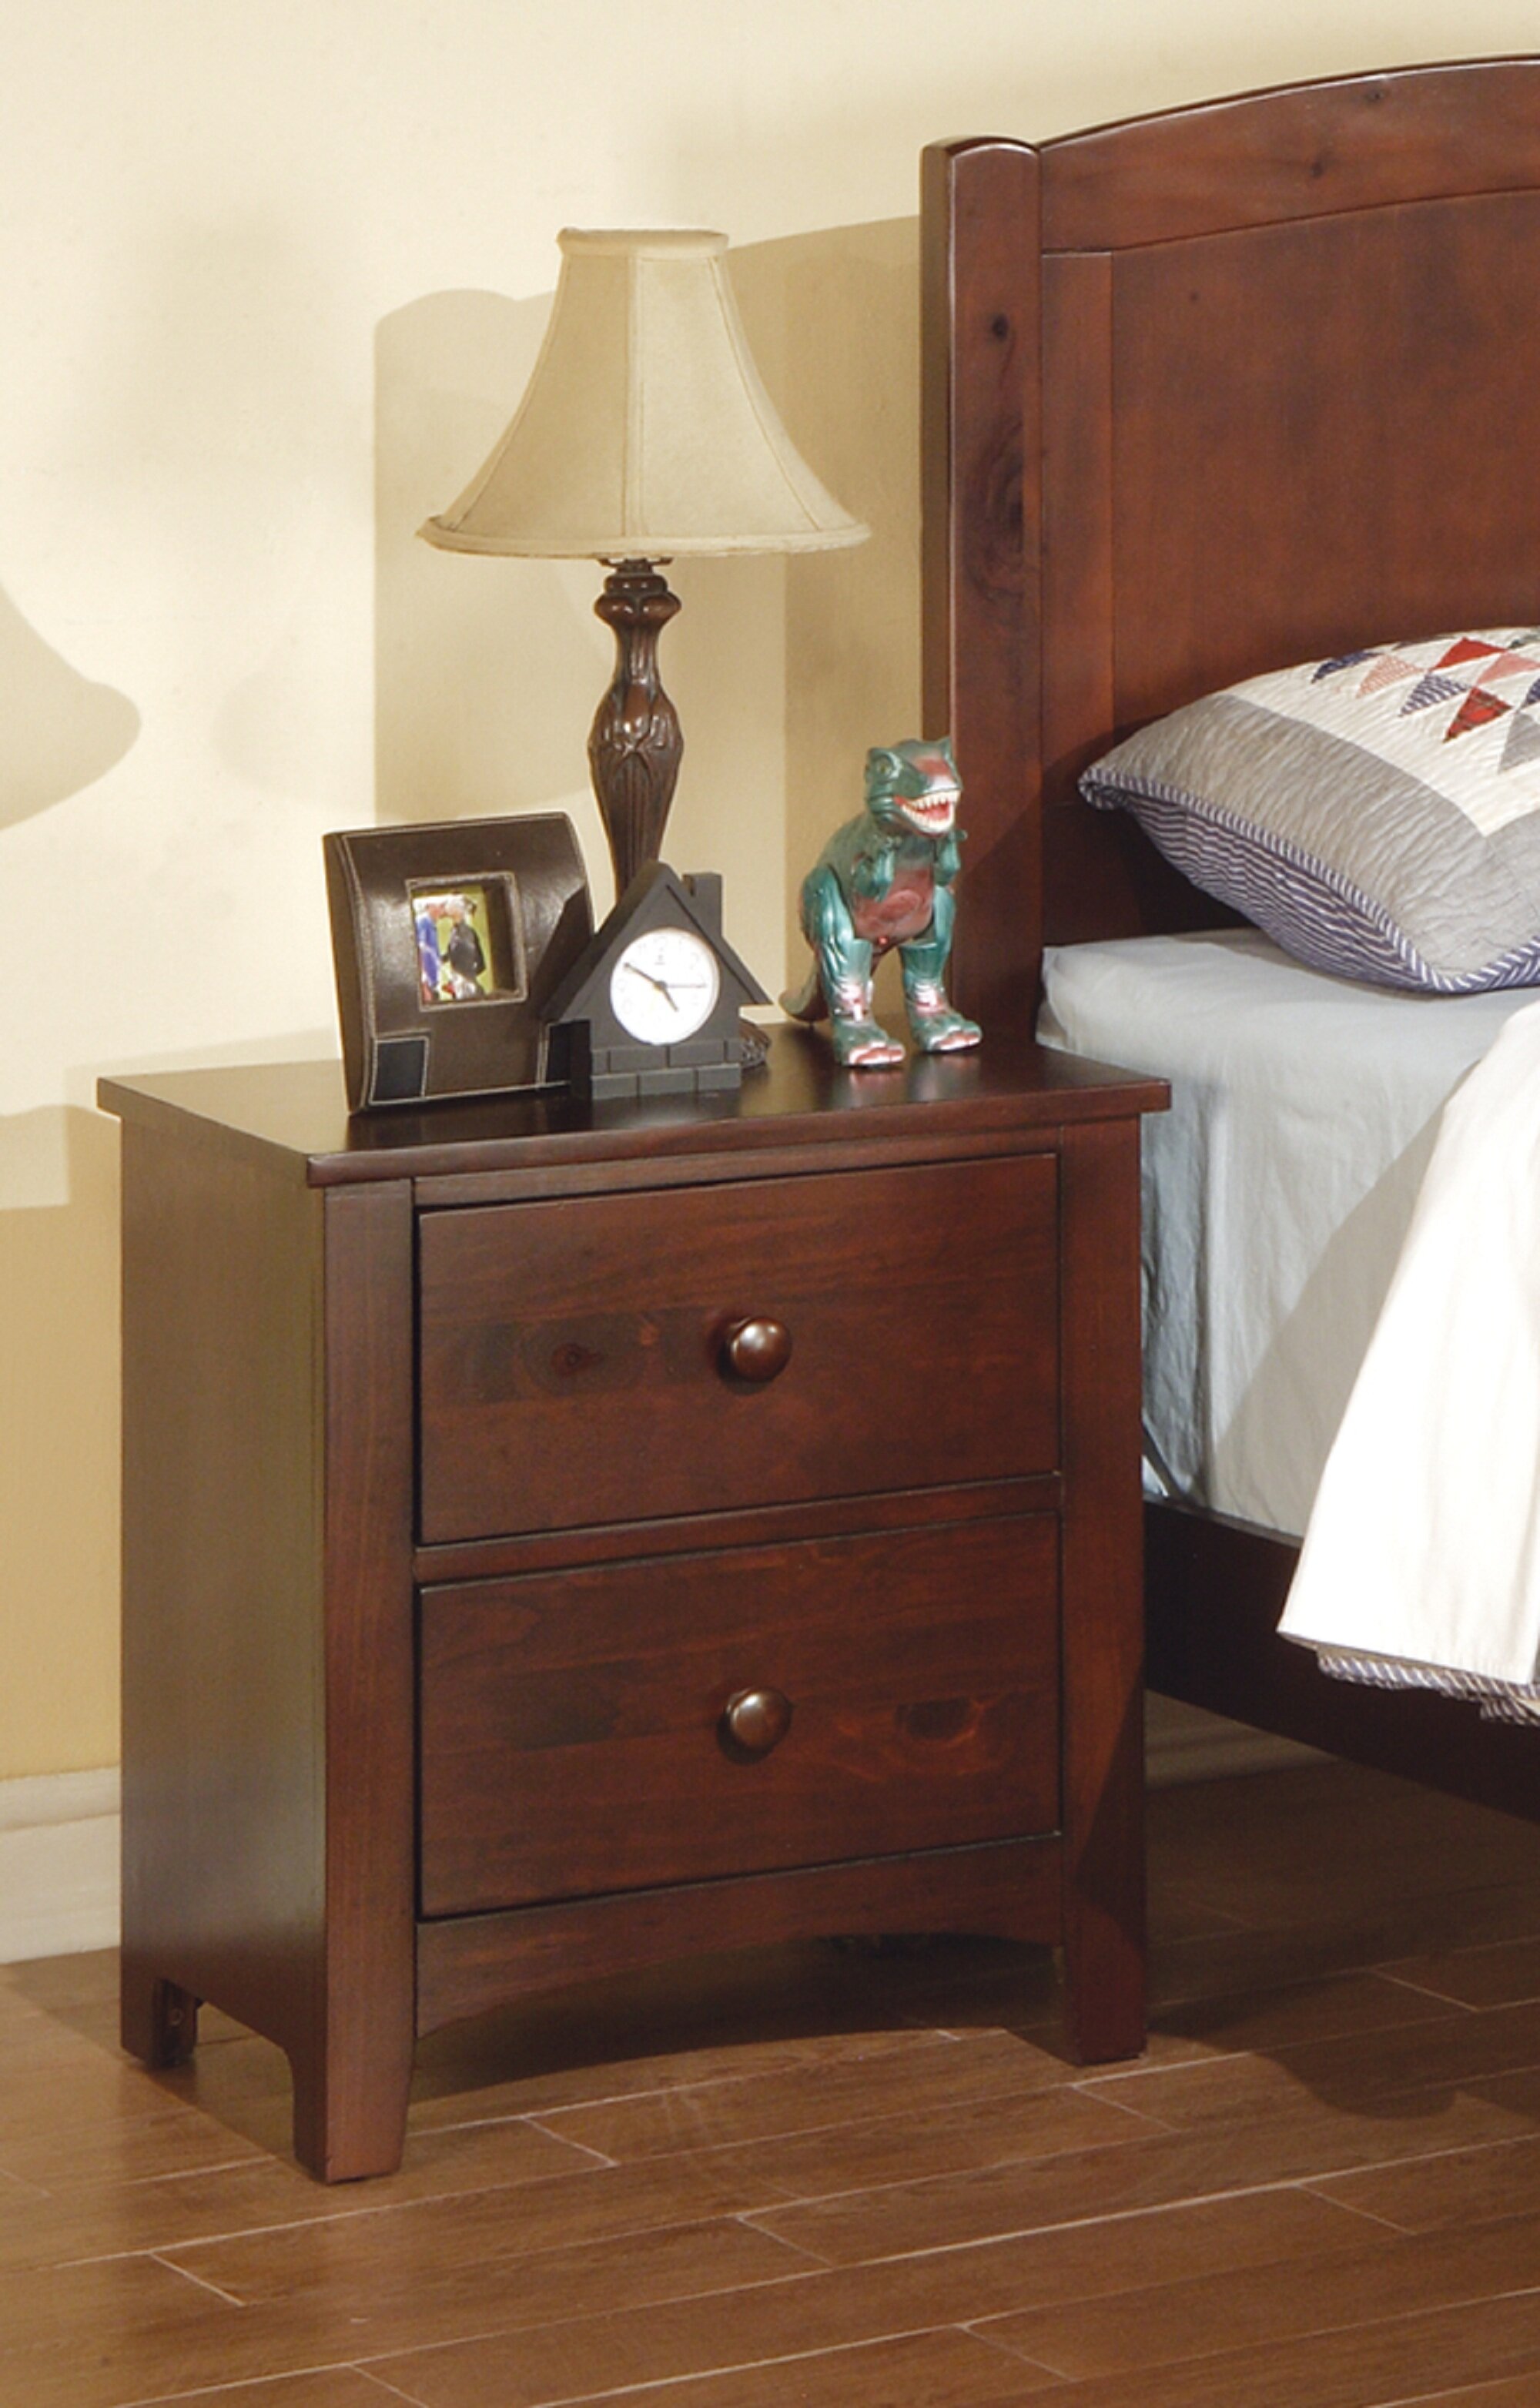 Henton 2 - Drawer Nightstand Canora Grey Color: White